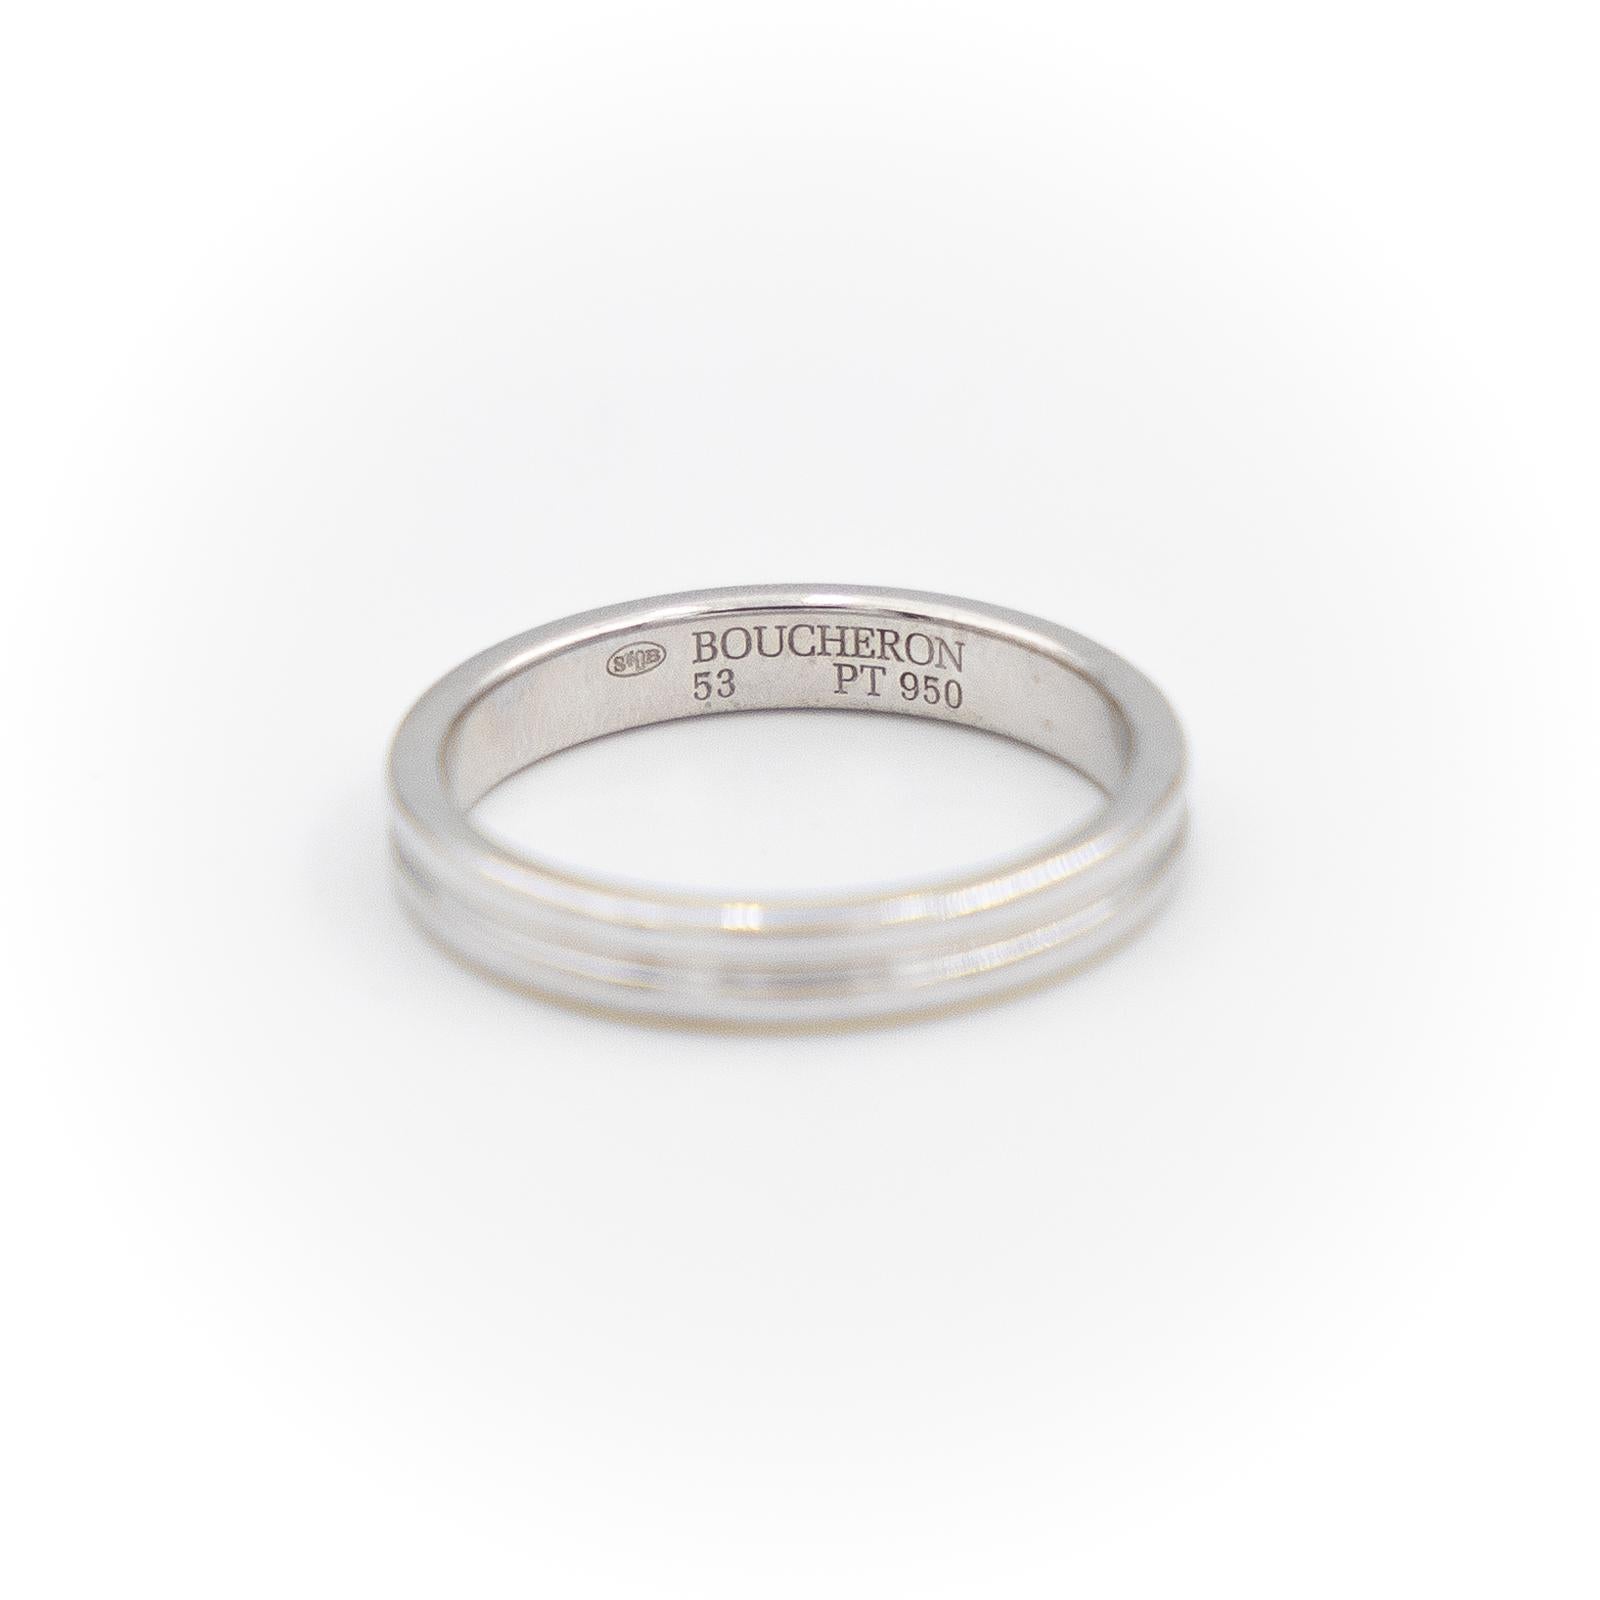 Wedding ring signed by the House of Boucheron in platinum 950 thousandths. Godron model. Finger size: 53. Ring width: 0.31 cm. Total weight: 5.09 g. Mascaron hallmark. Excellent condition
